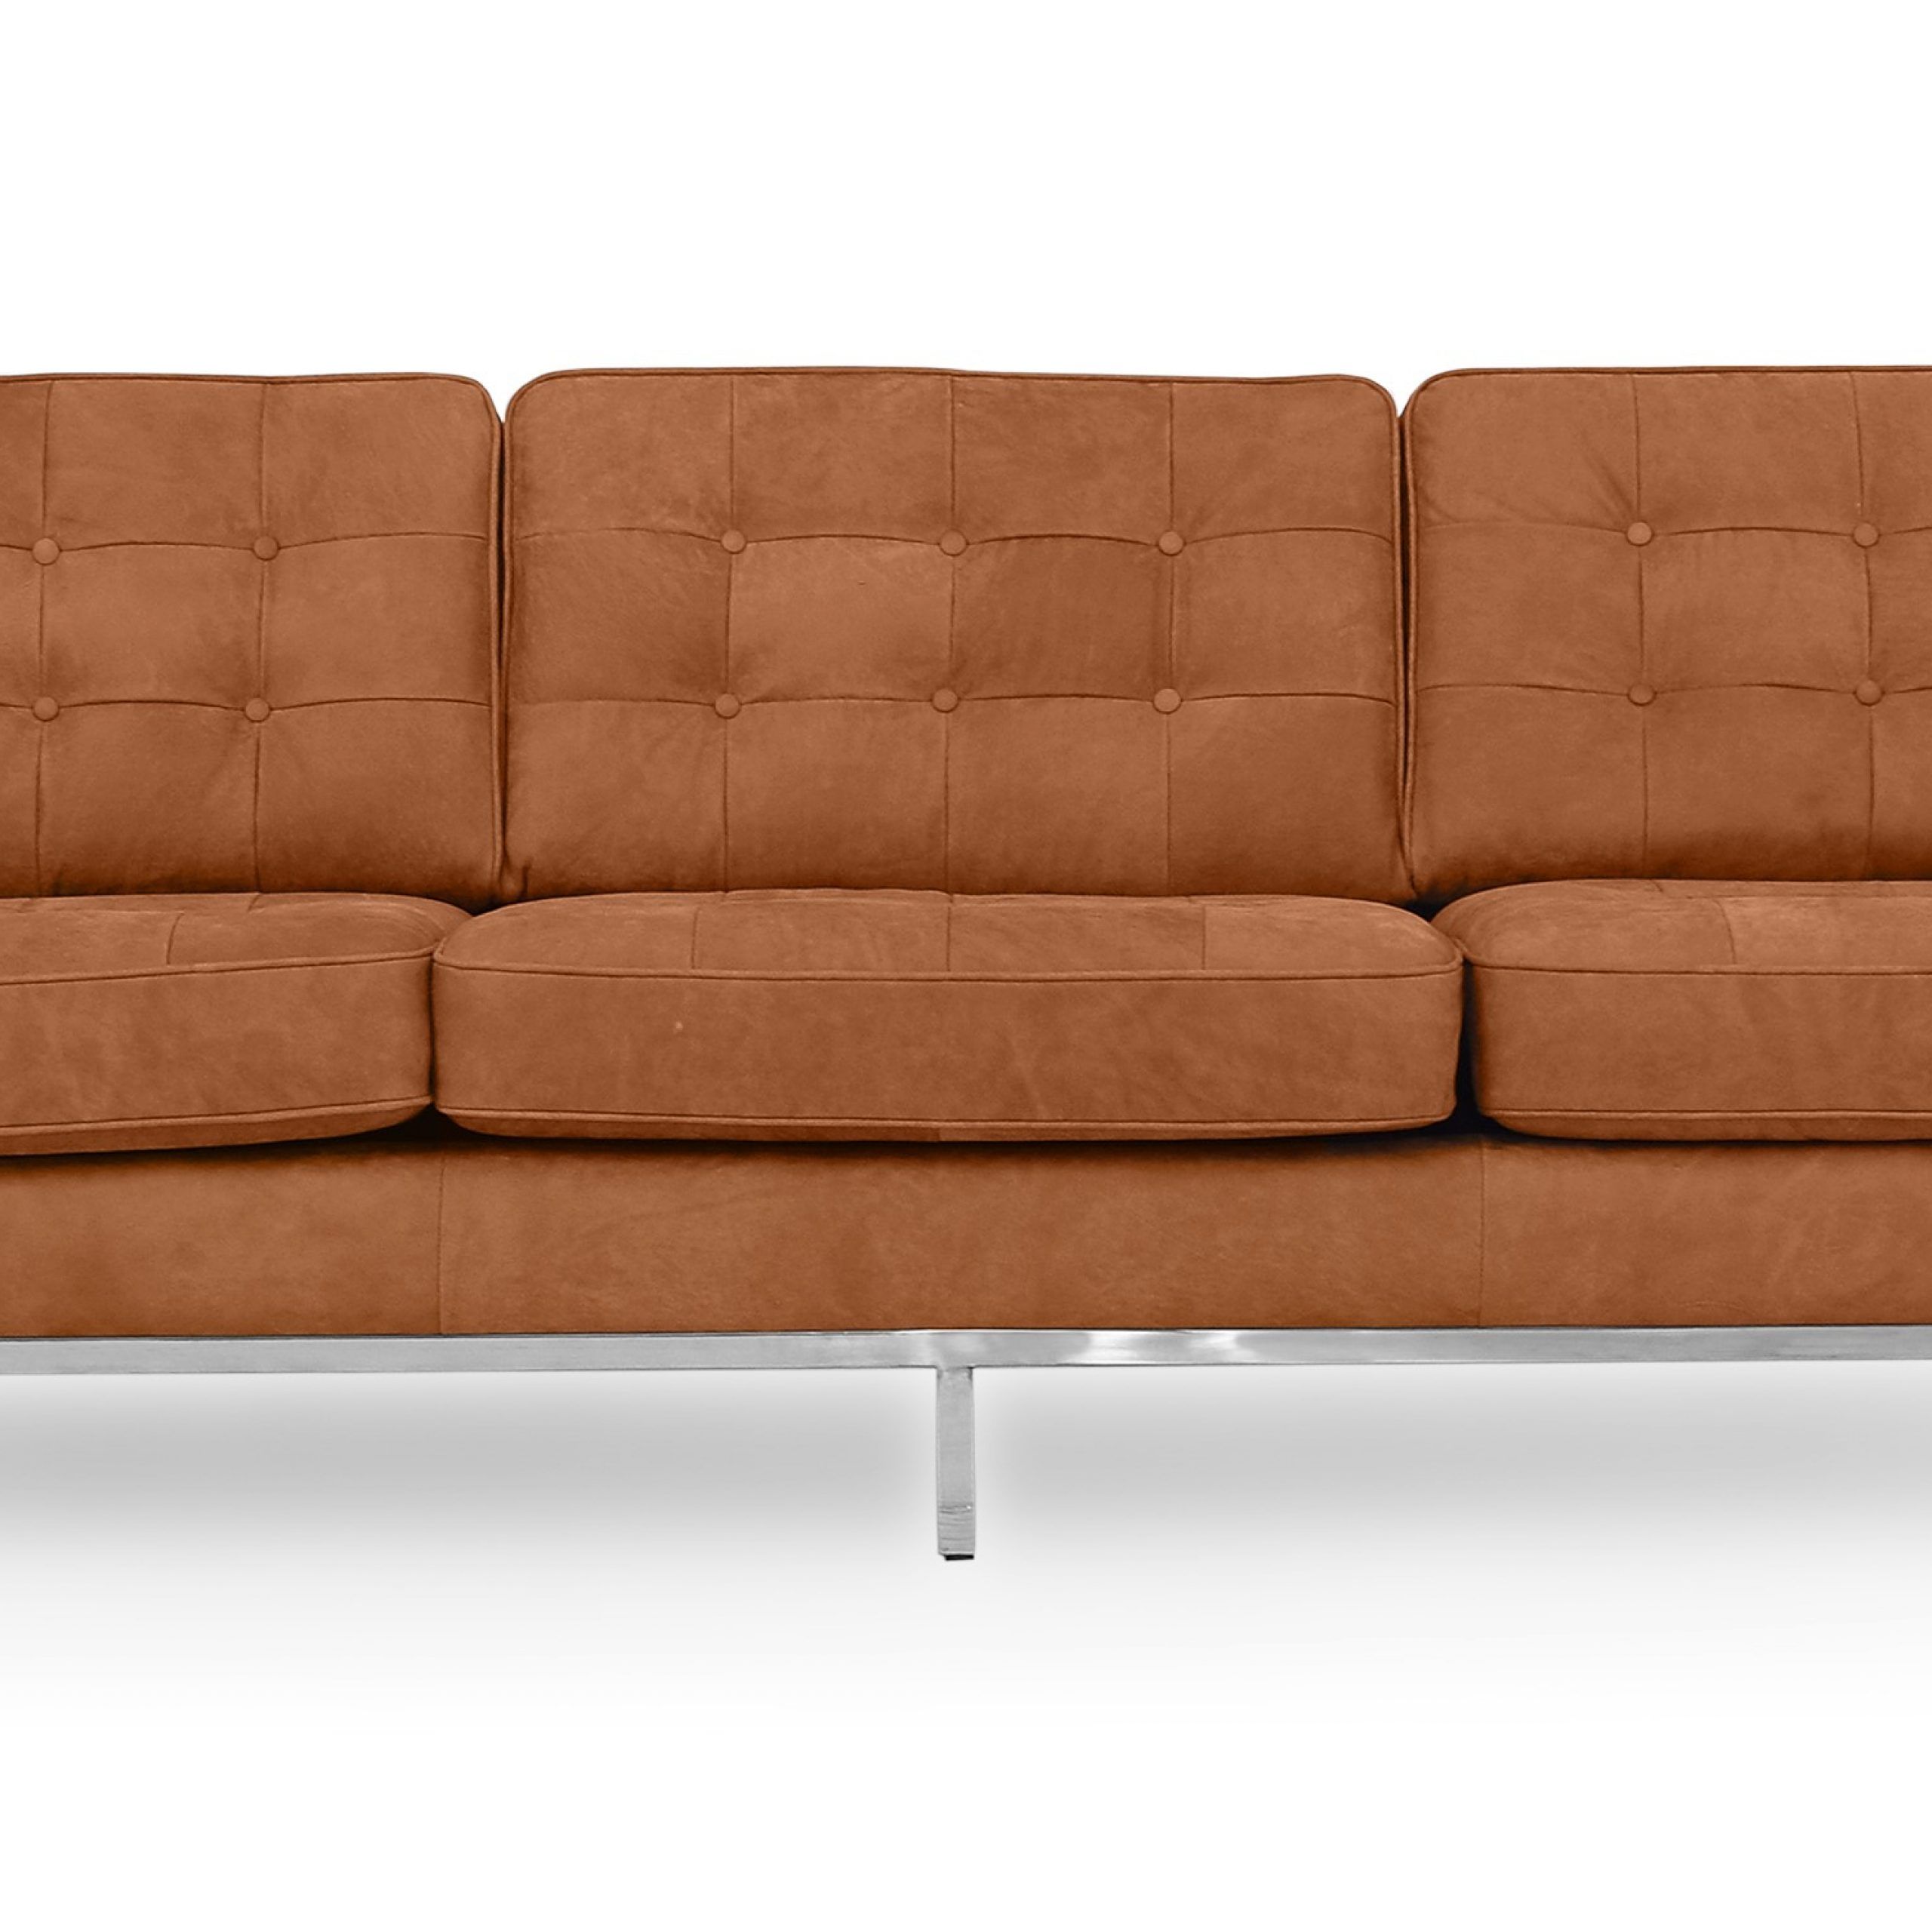 Kardiel Florence Mid Century Modern 89" Sofa, Cognac Full Pertaining To Florence Mid Century Modern Right Sectional Sofas (View 1 of 15)